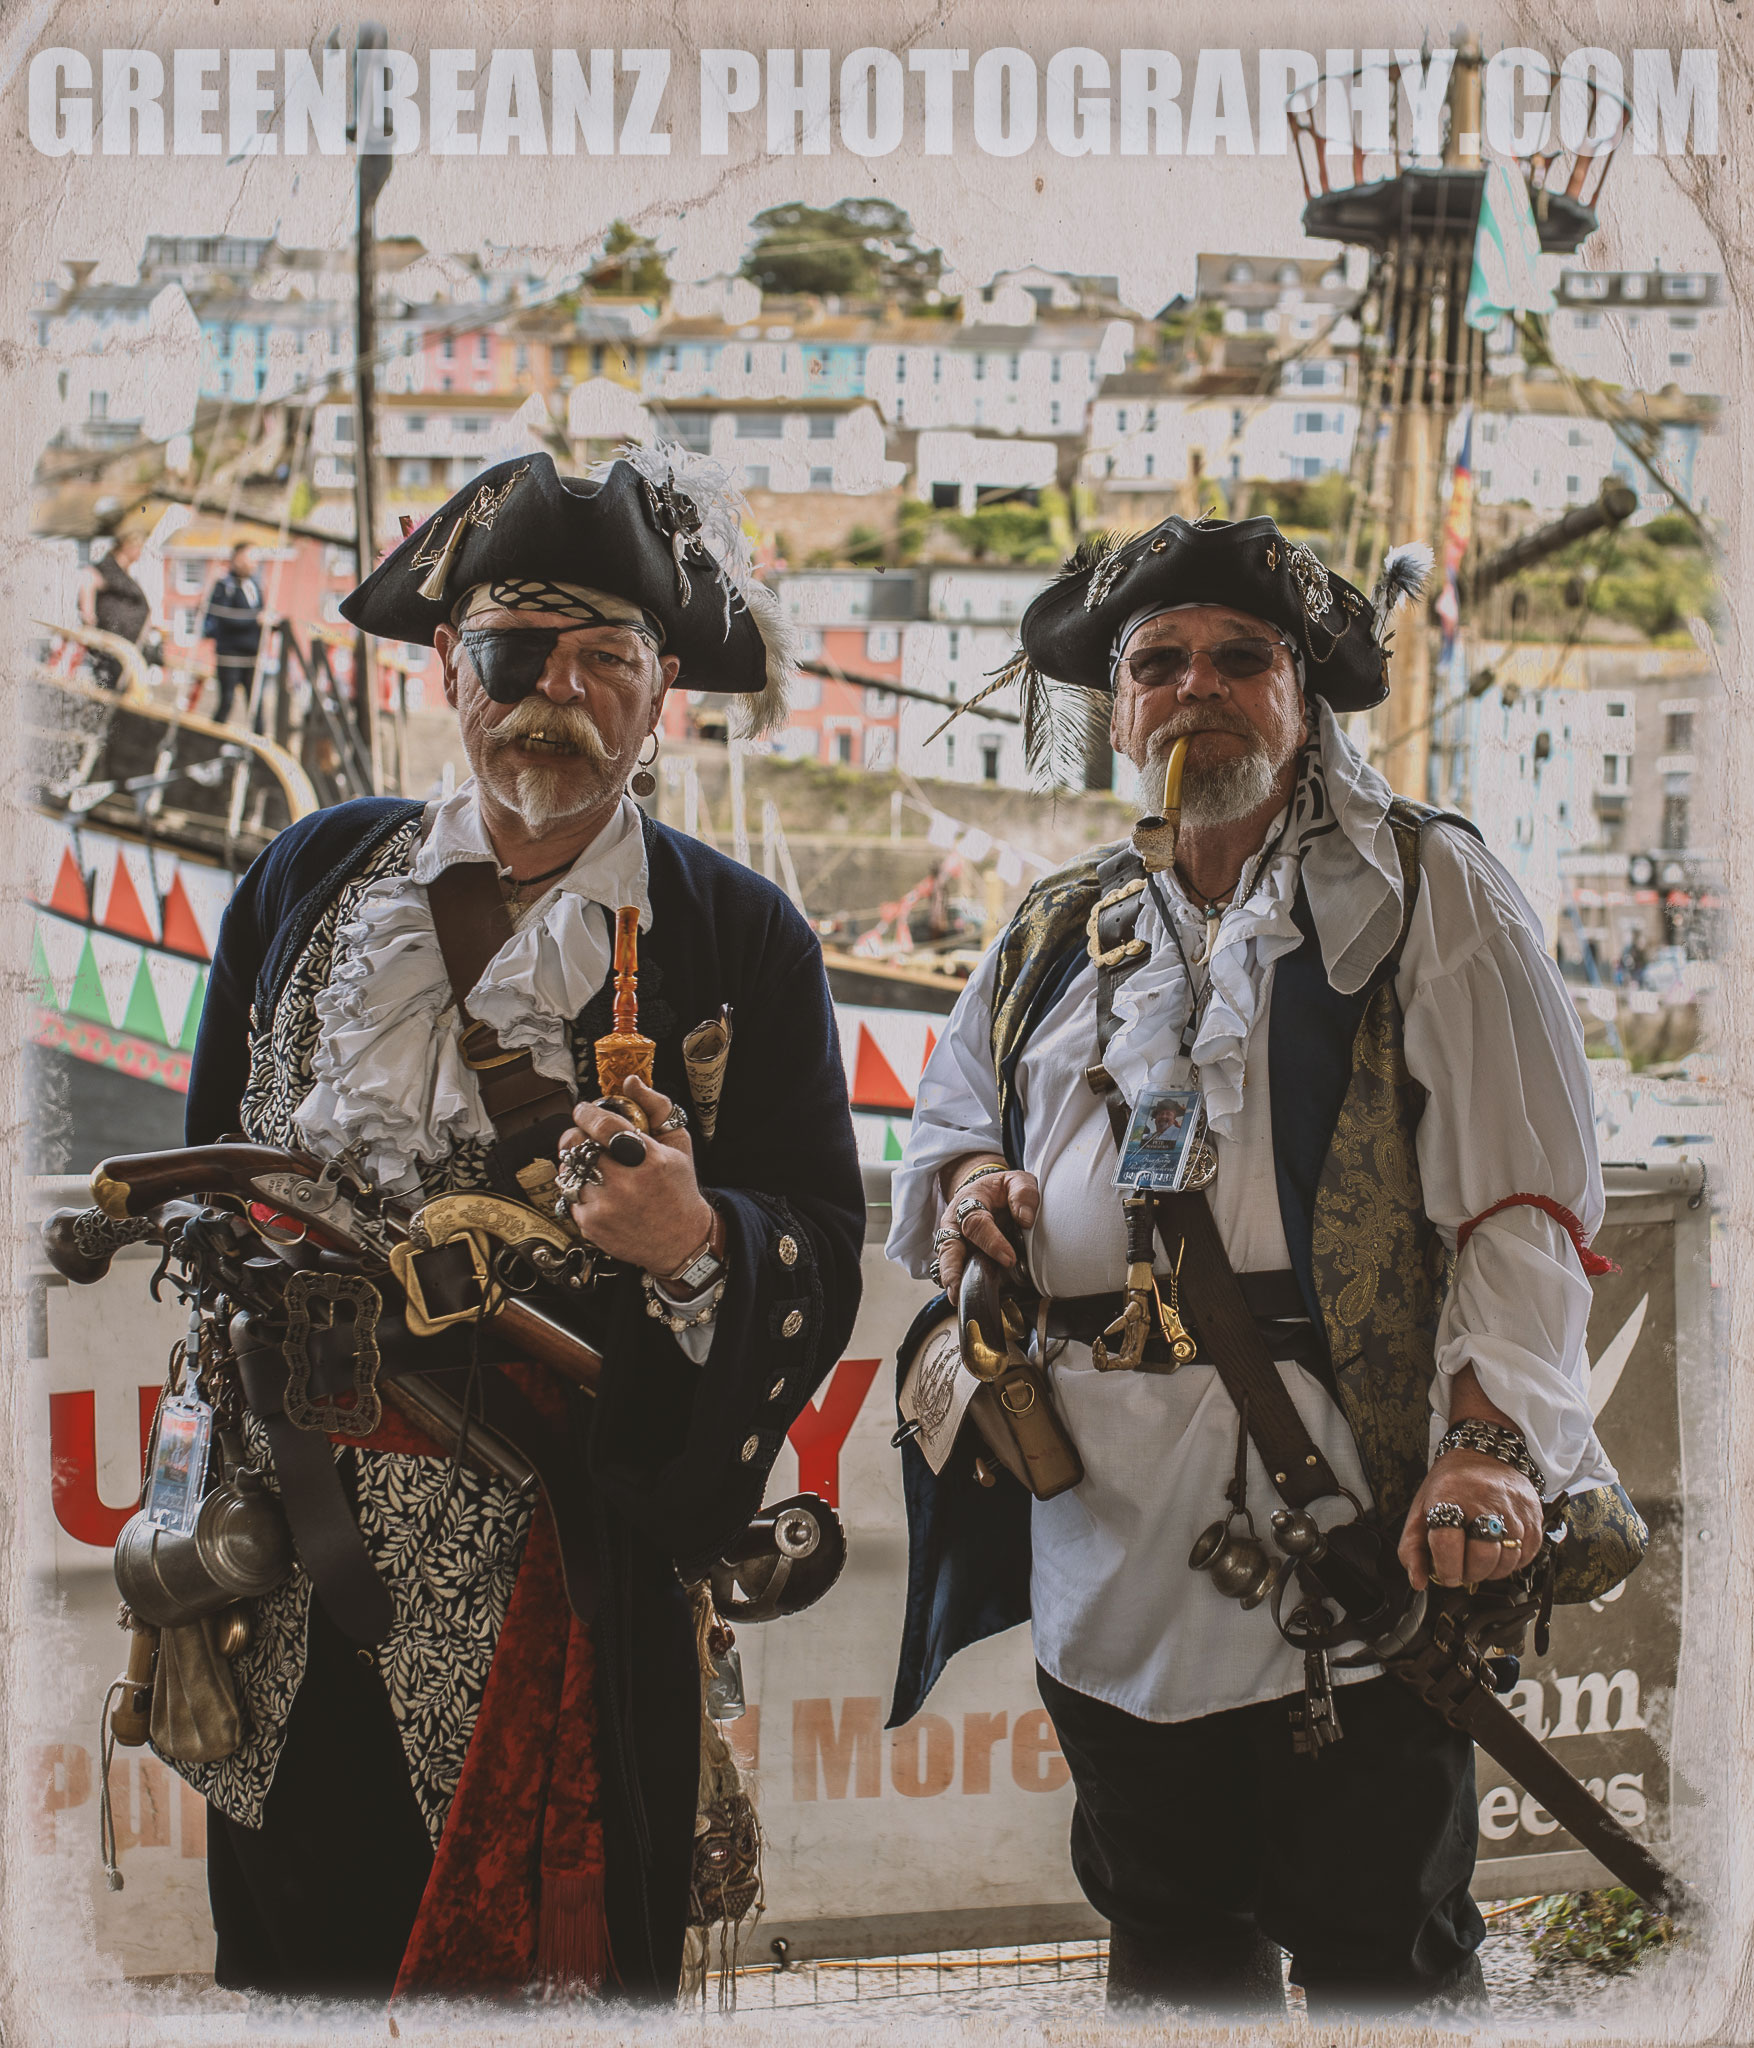 Two Pirates on the South Devon coast at Brixham Pirate Festival May 2019